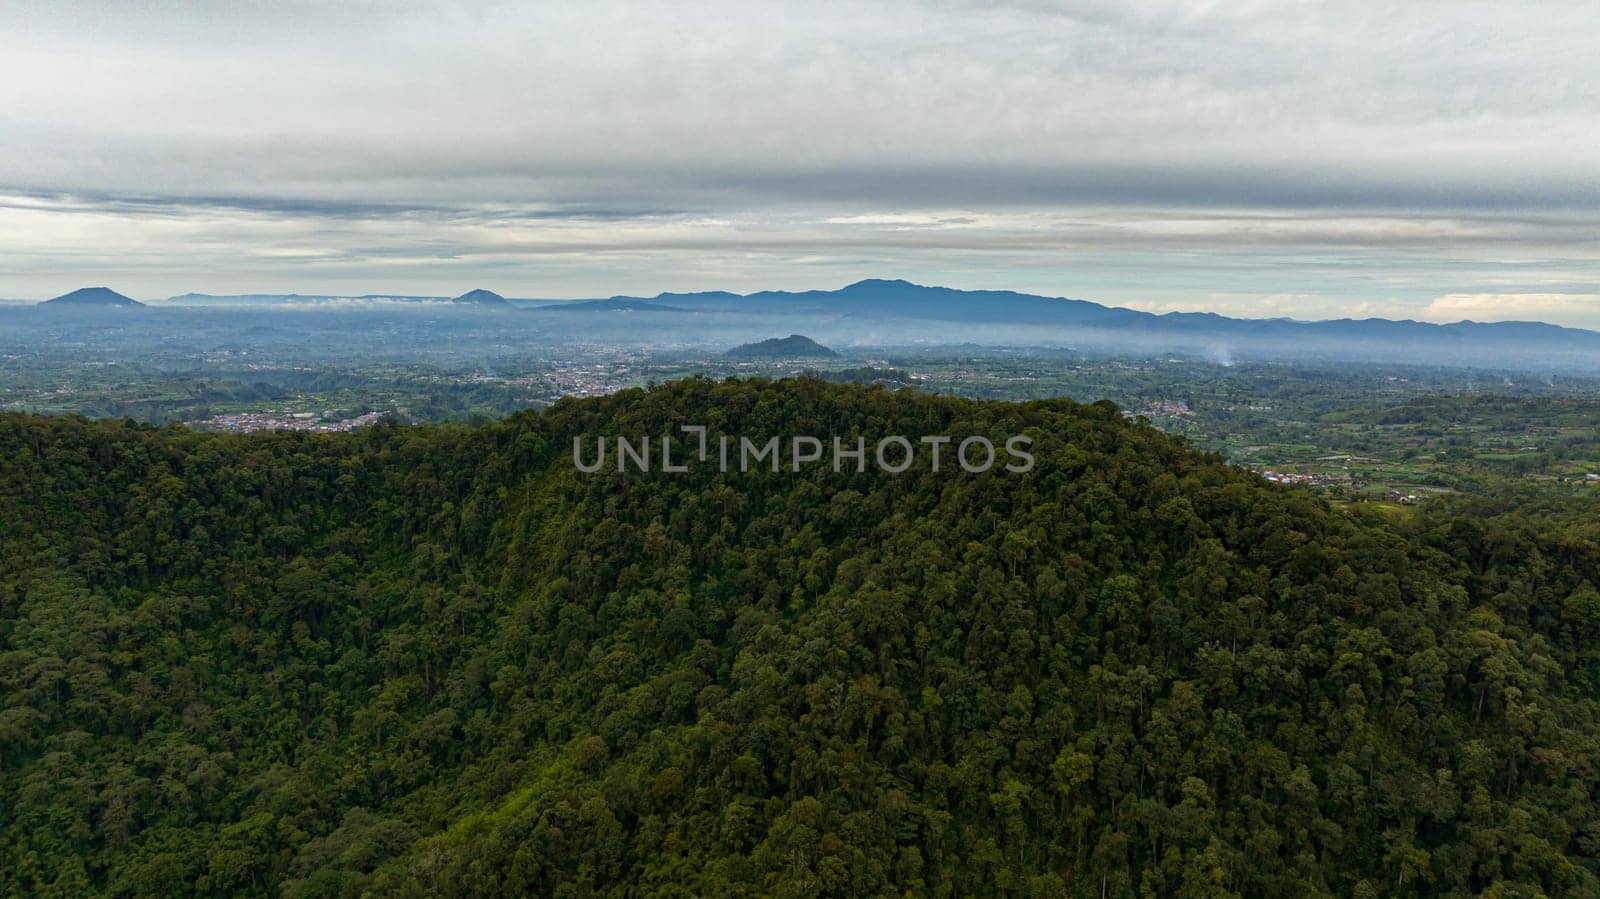 Aerial view of Berastagi city among mountains and farmland in a mountain valley. Sumatra. Indonesia.